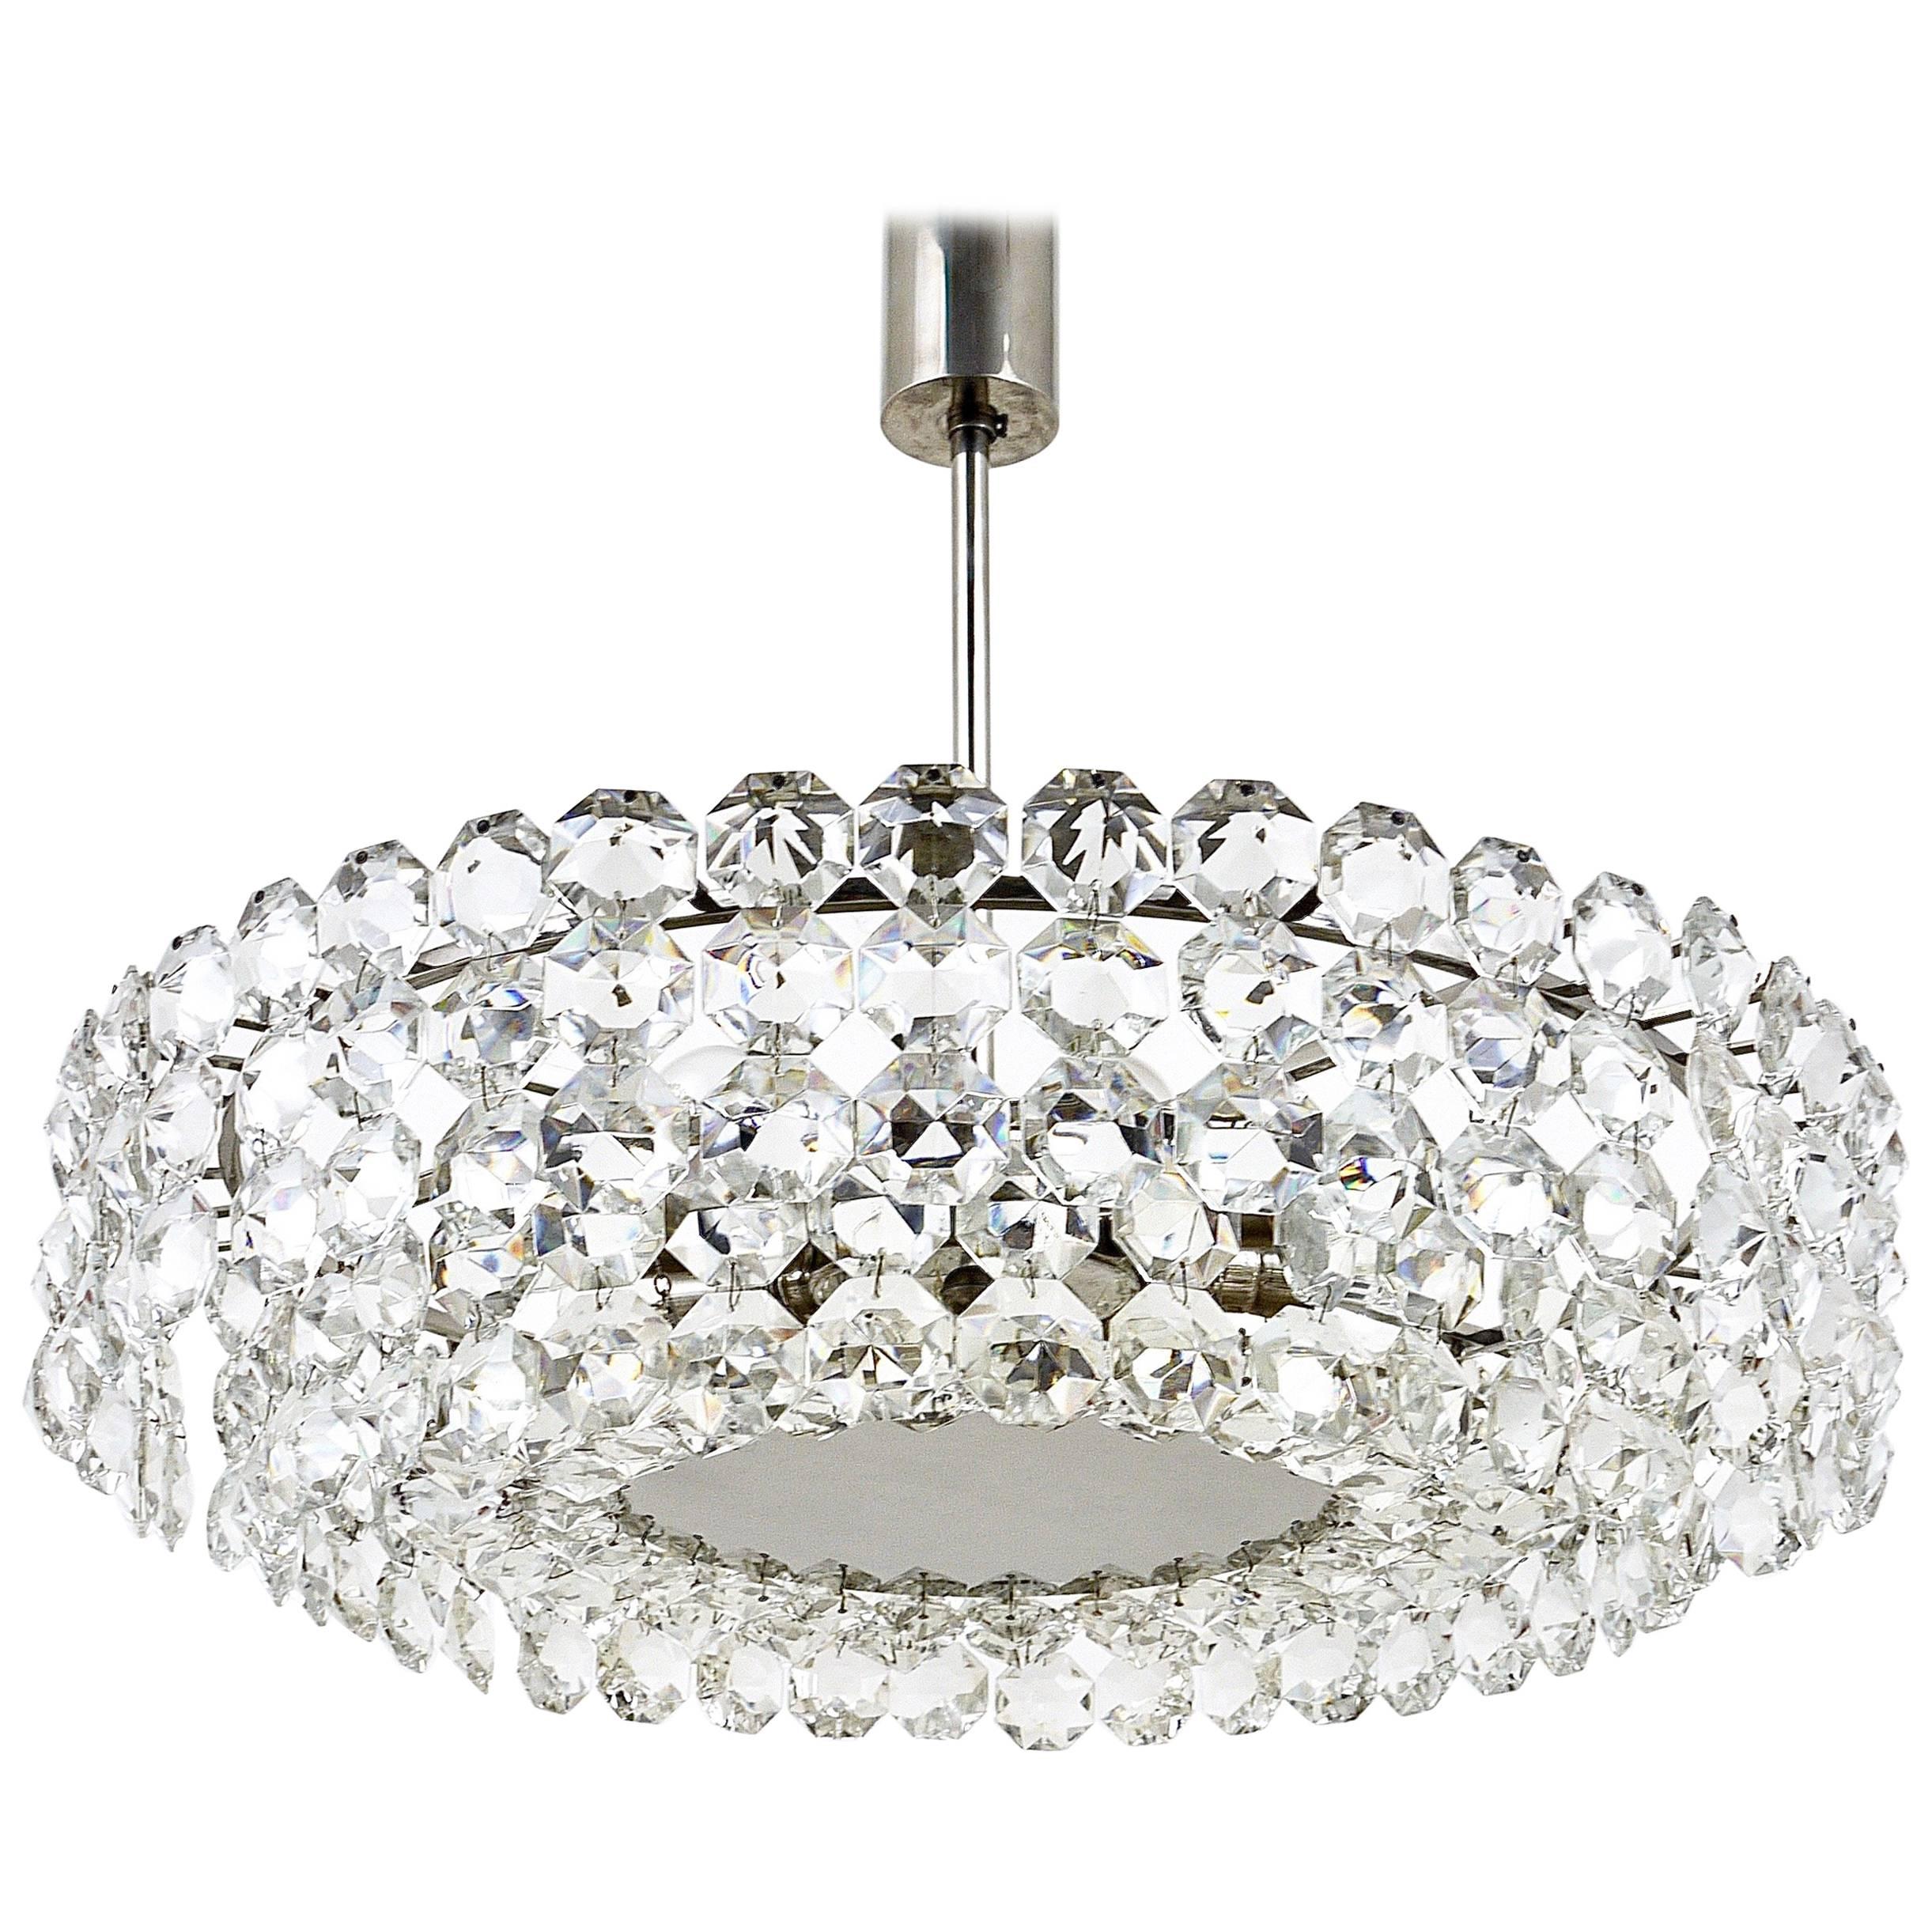 Large Bakalowits Nickel Chandelier with Diamond-Shaped Crystals, Austria, 1960s